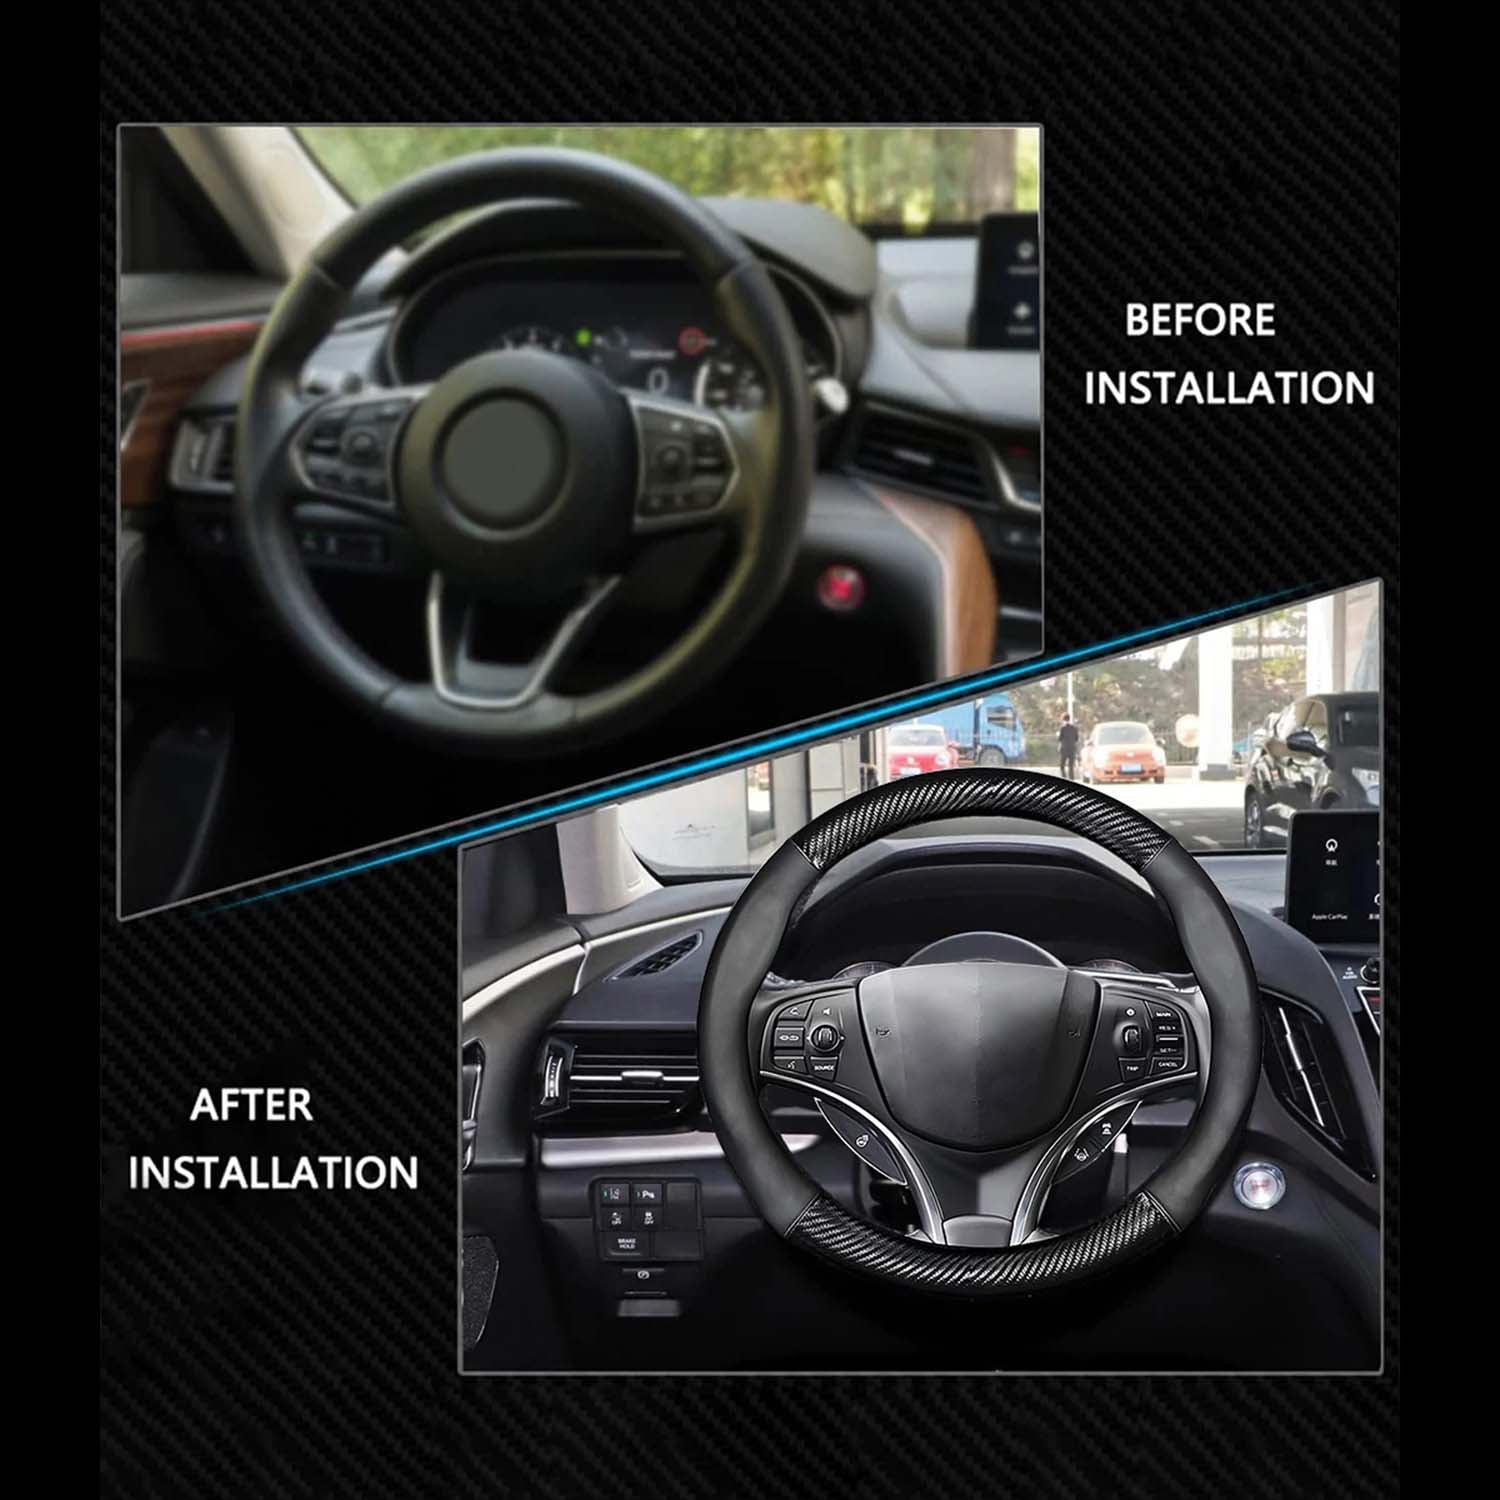 Car Steering Wheel Cover, Custom For Your Cars, Leather Nonslip 3D Carbon Fiber Texture Sport Style Wheel Cover for Women, Interior Modification for All Car Accessories TS18992 - Delicate Leather